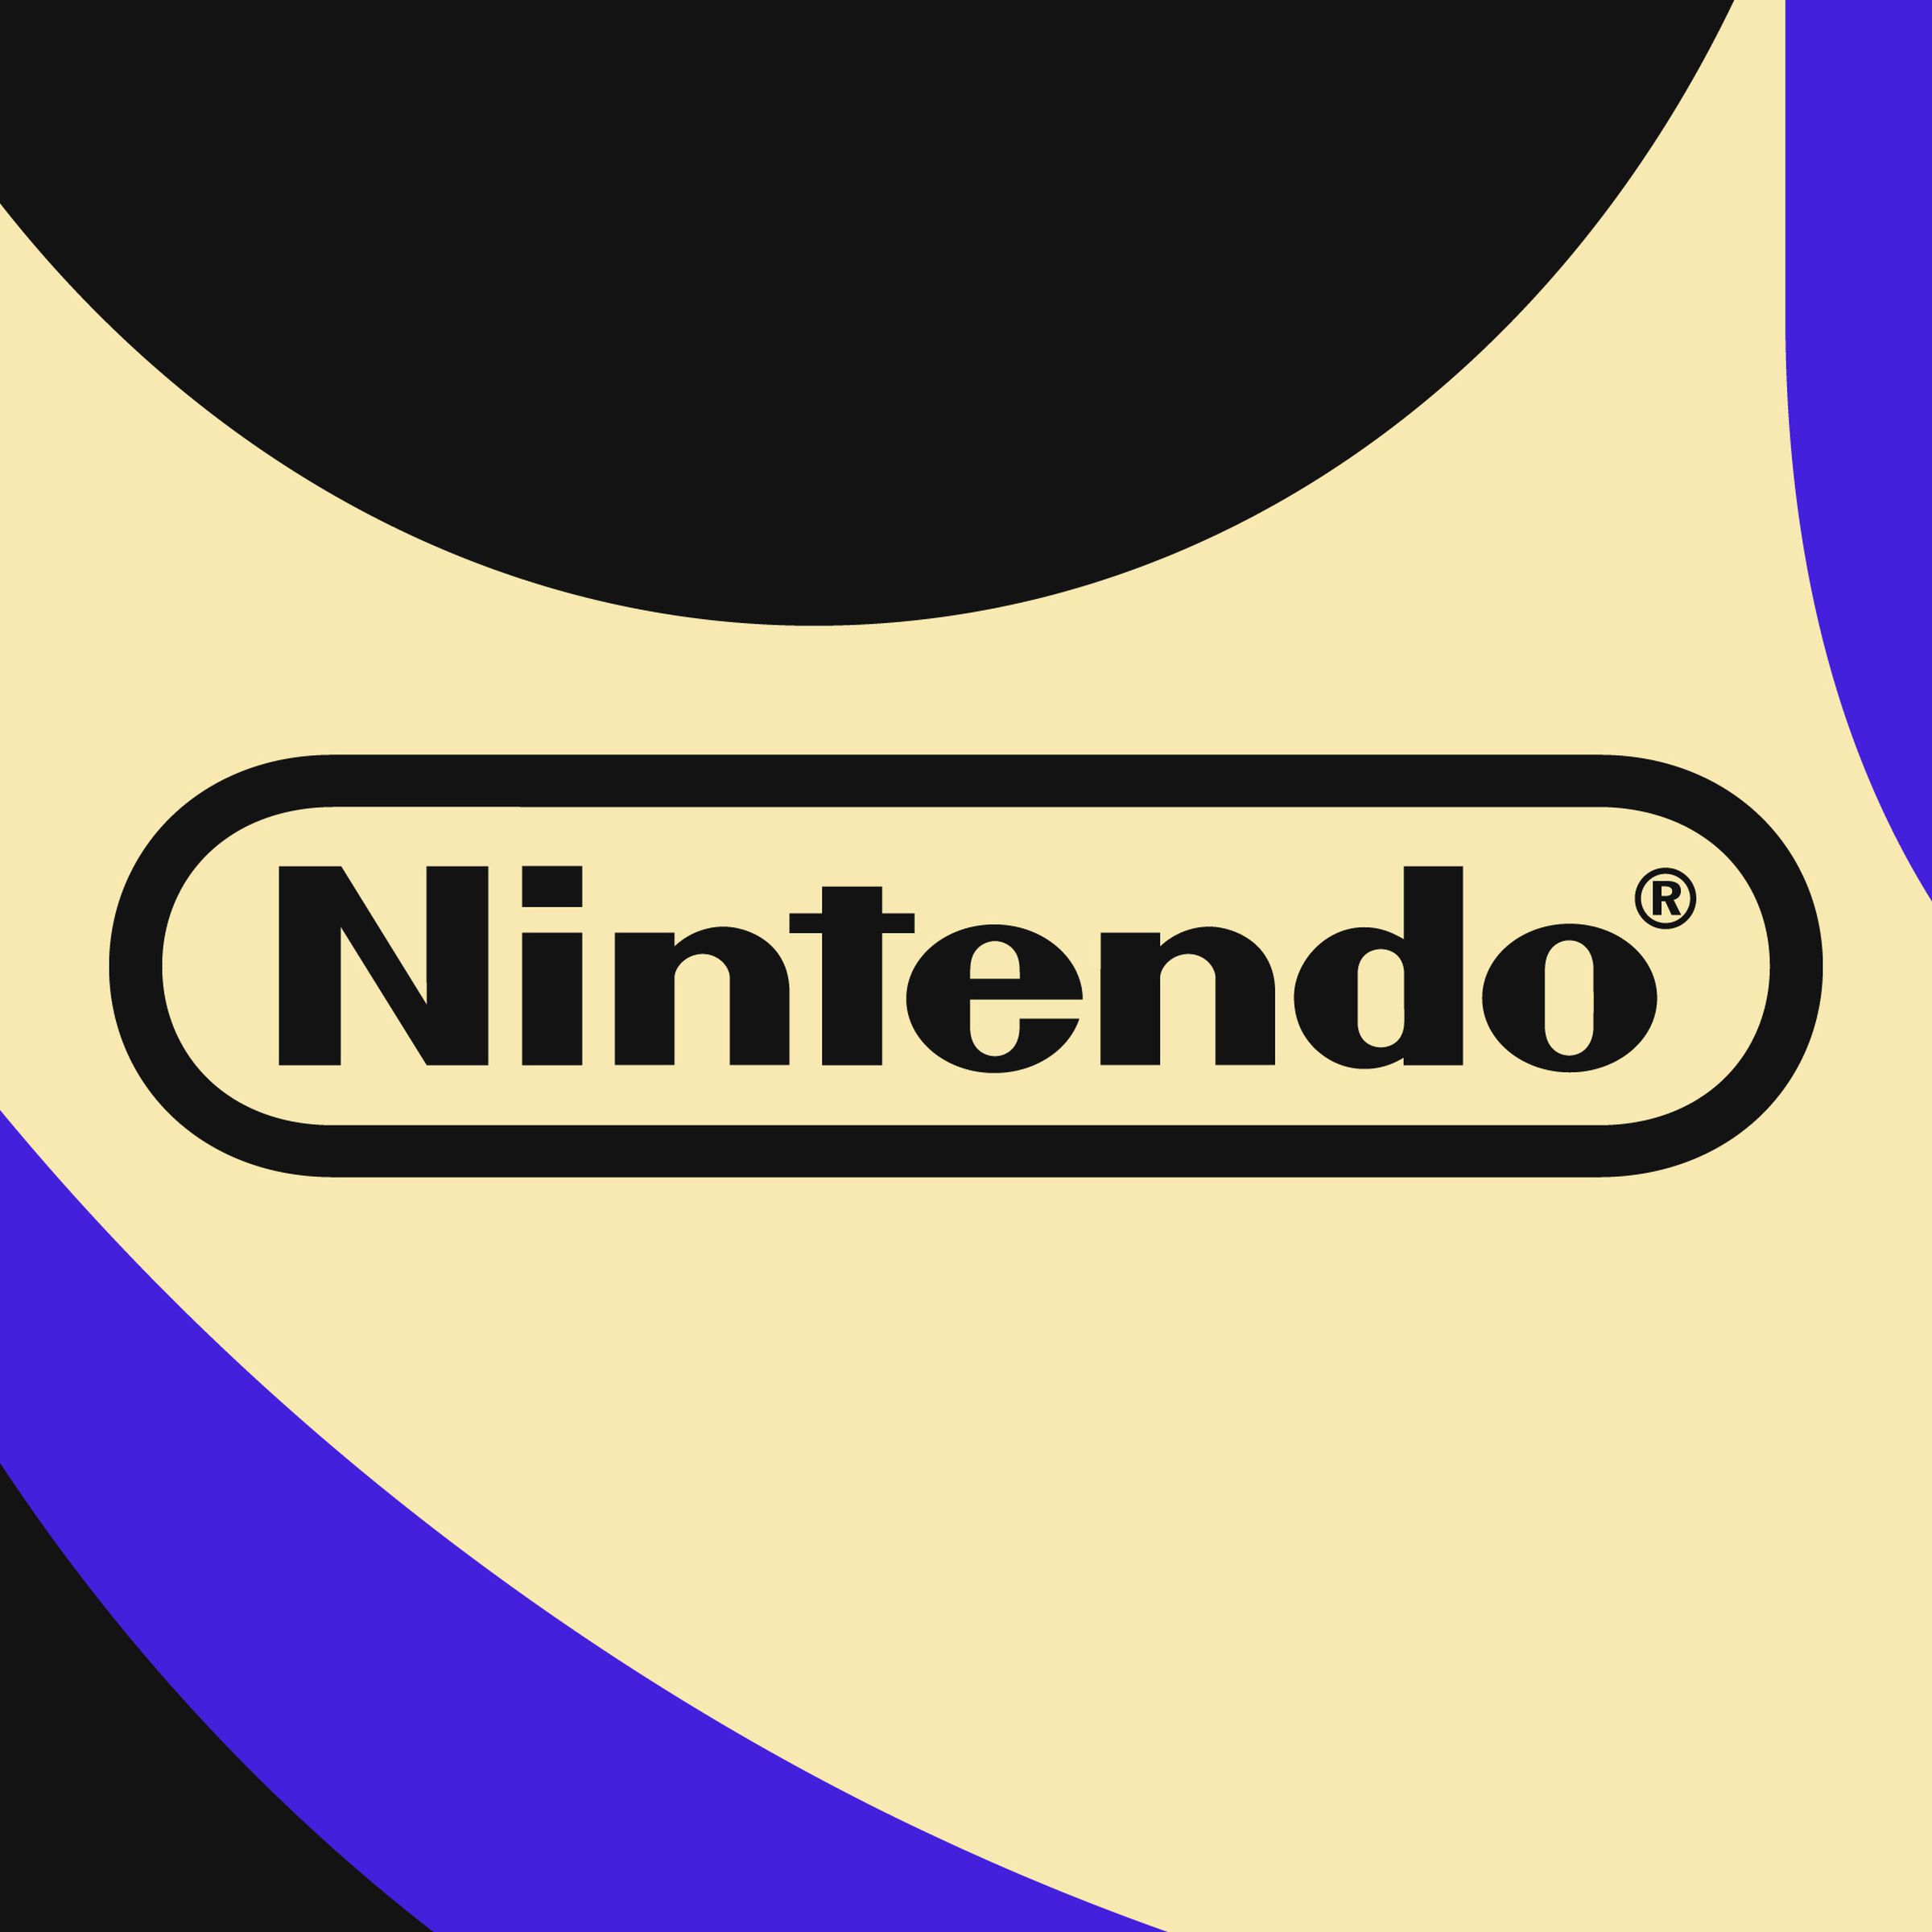 Stock image illustration featuring the Nintendo logo stamped in black on a background of tan, blue, and black color blocking.